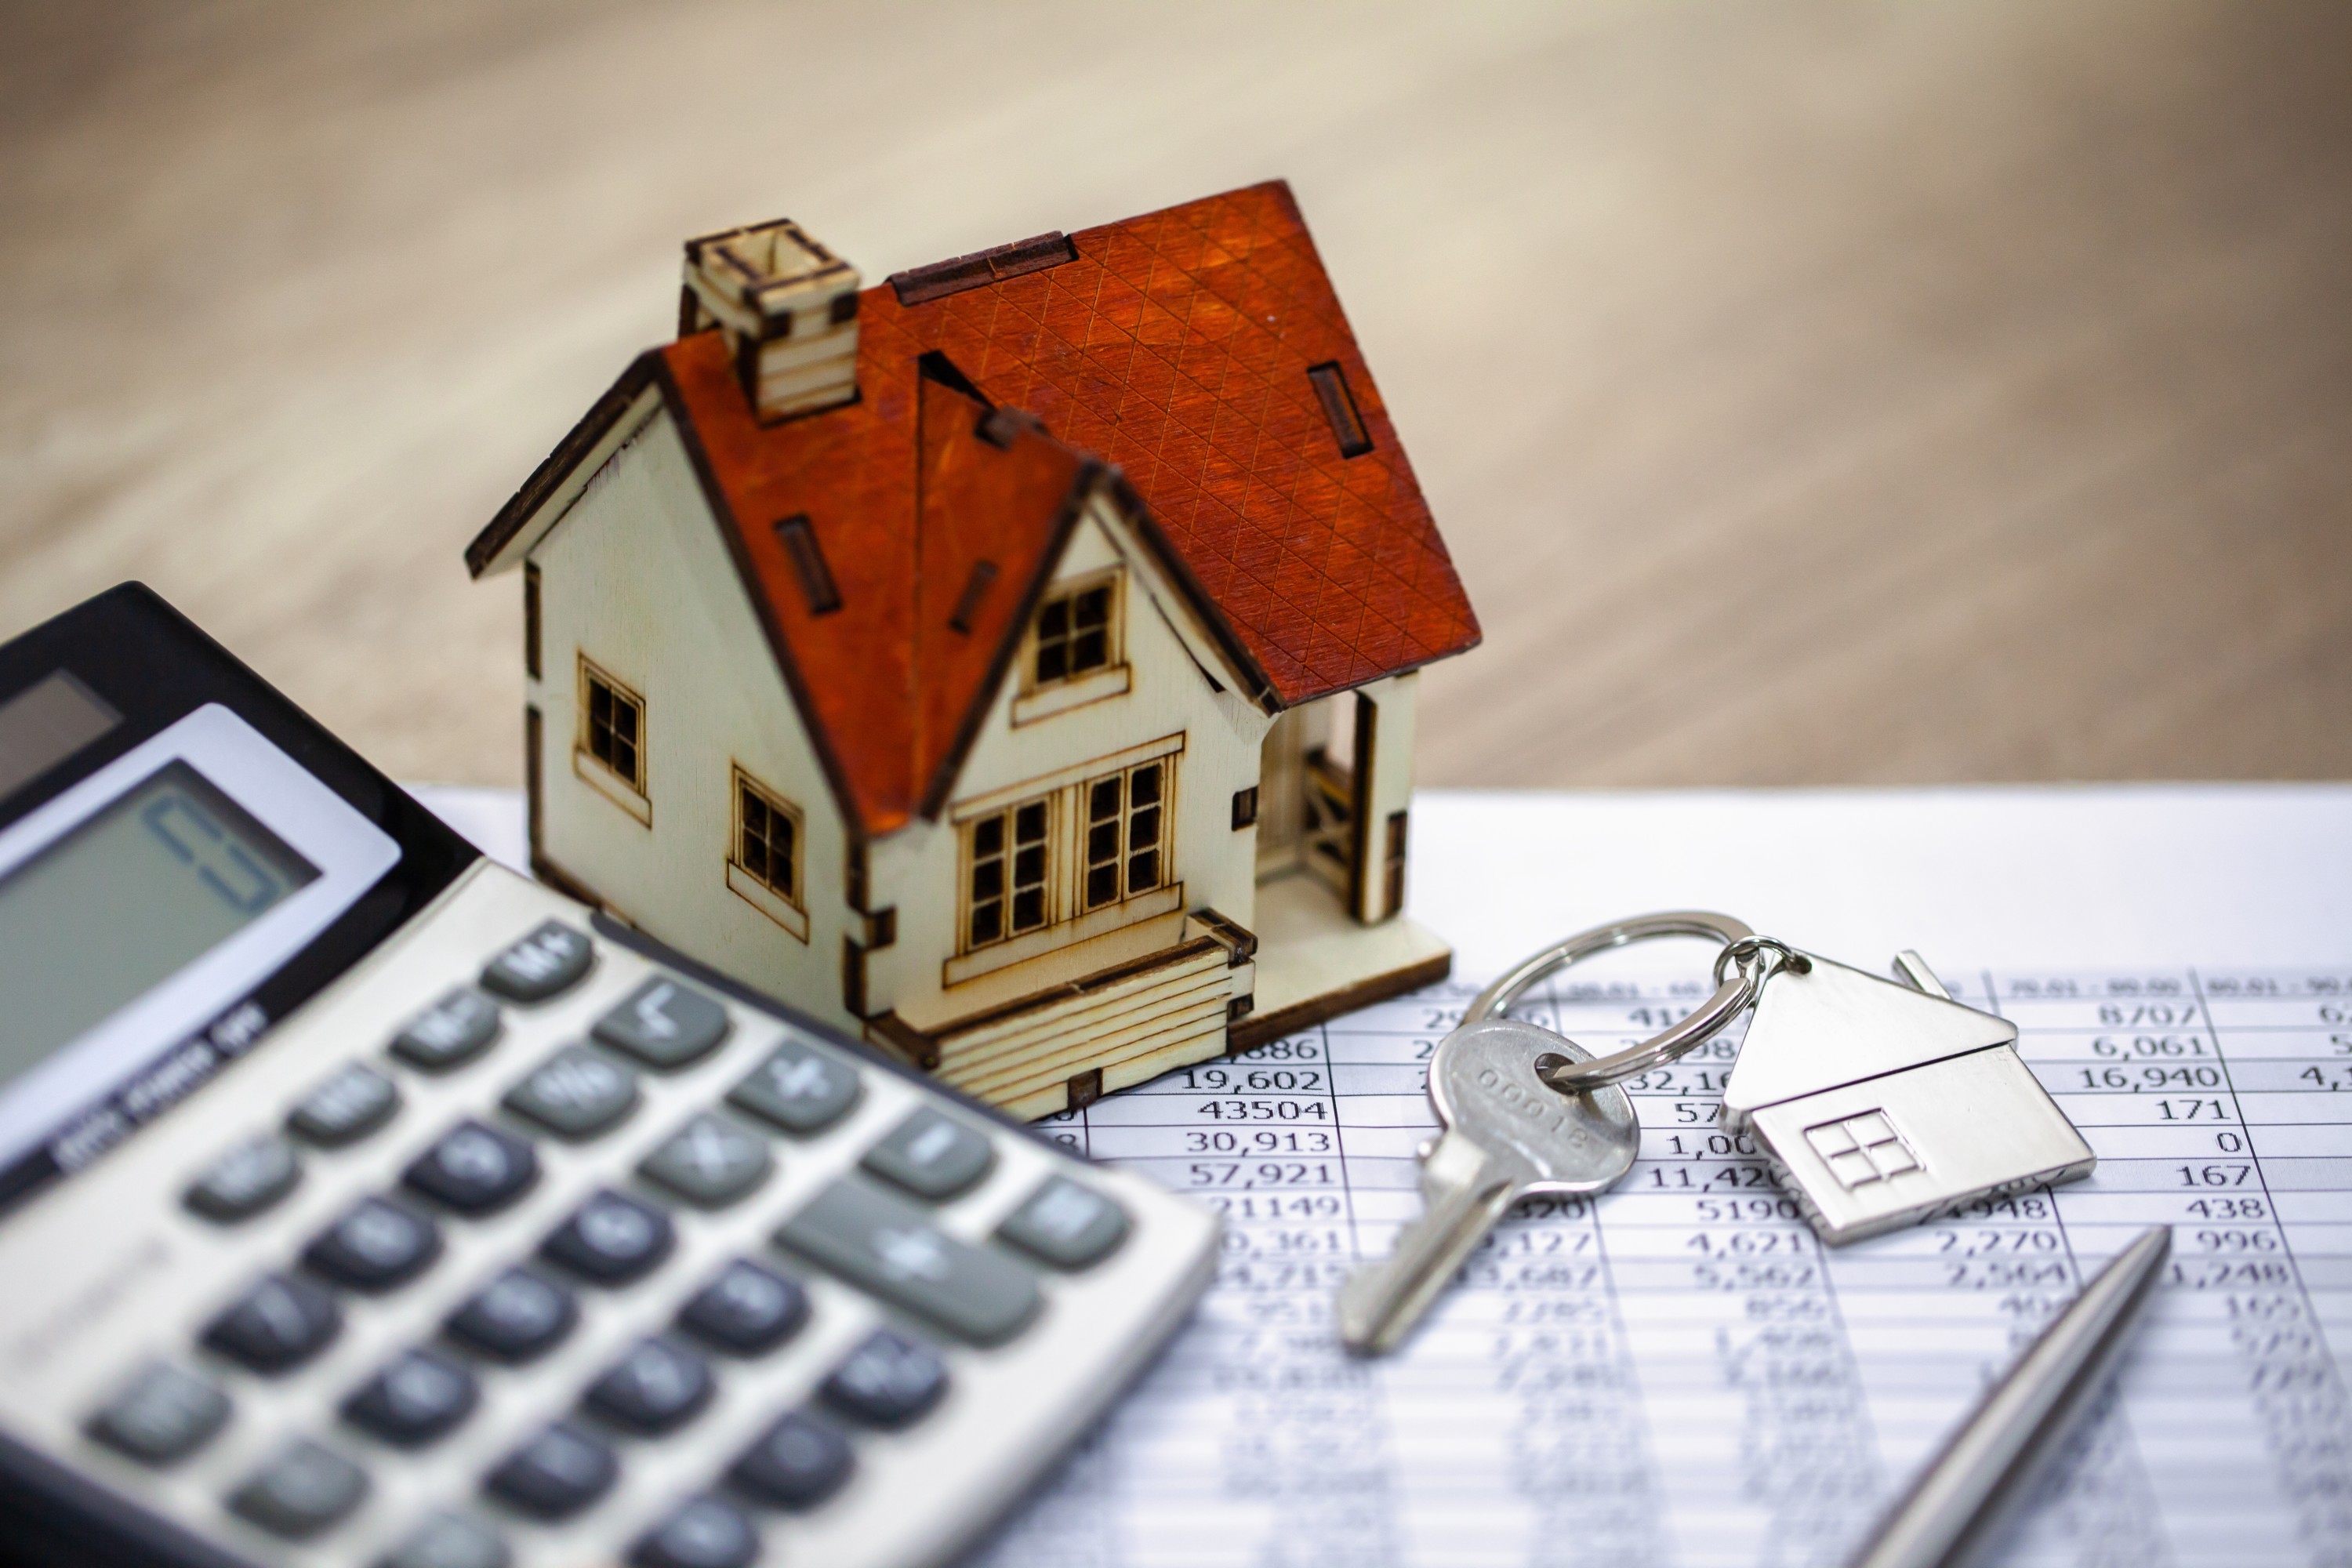 mortgage calculator uk: how much can I afford